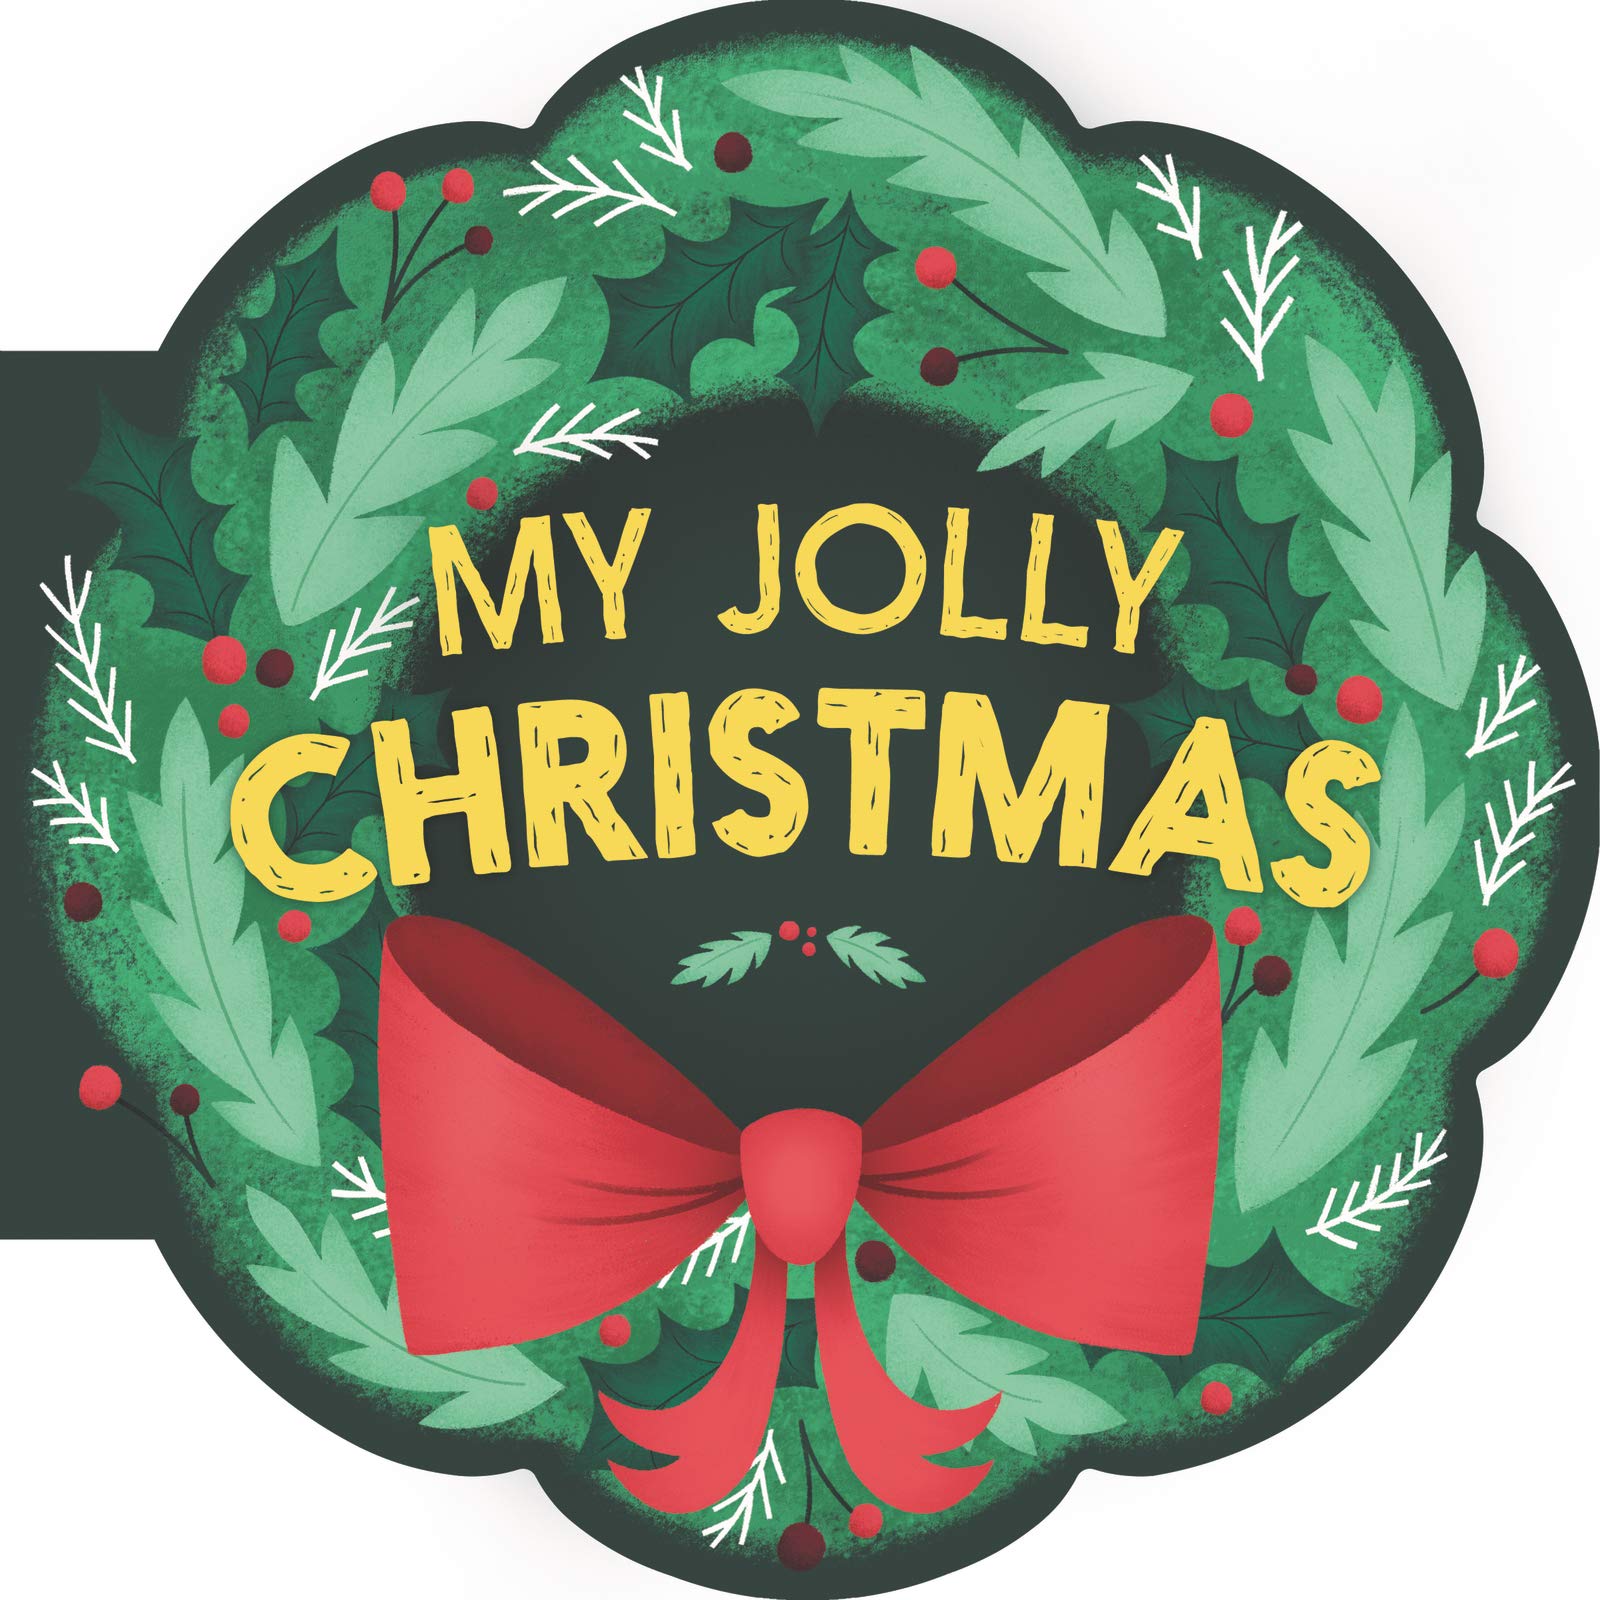 My Jolly Christmas (My Little Holiday)